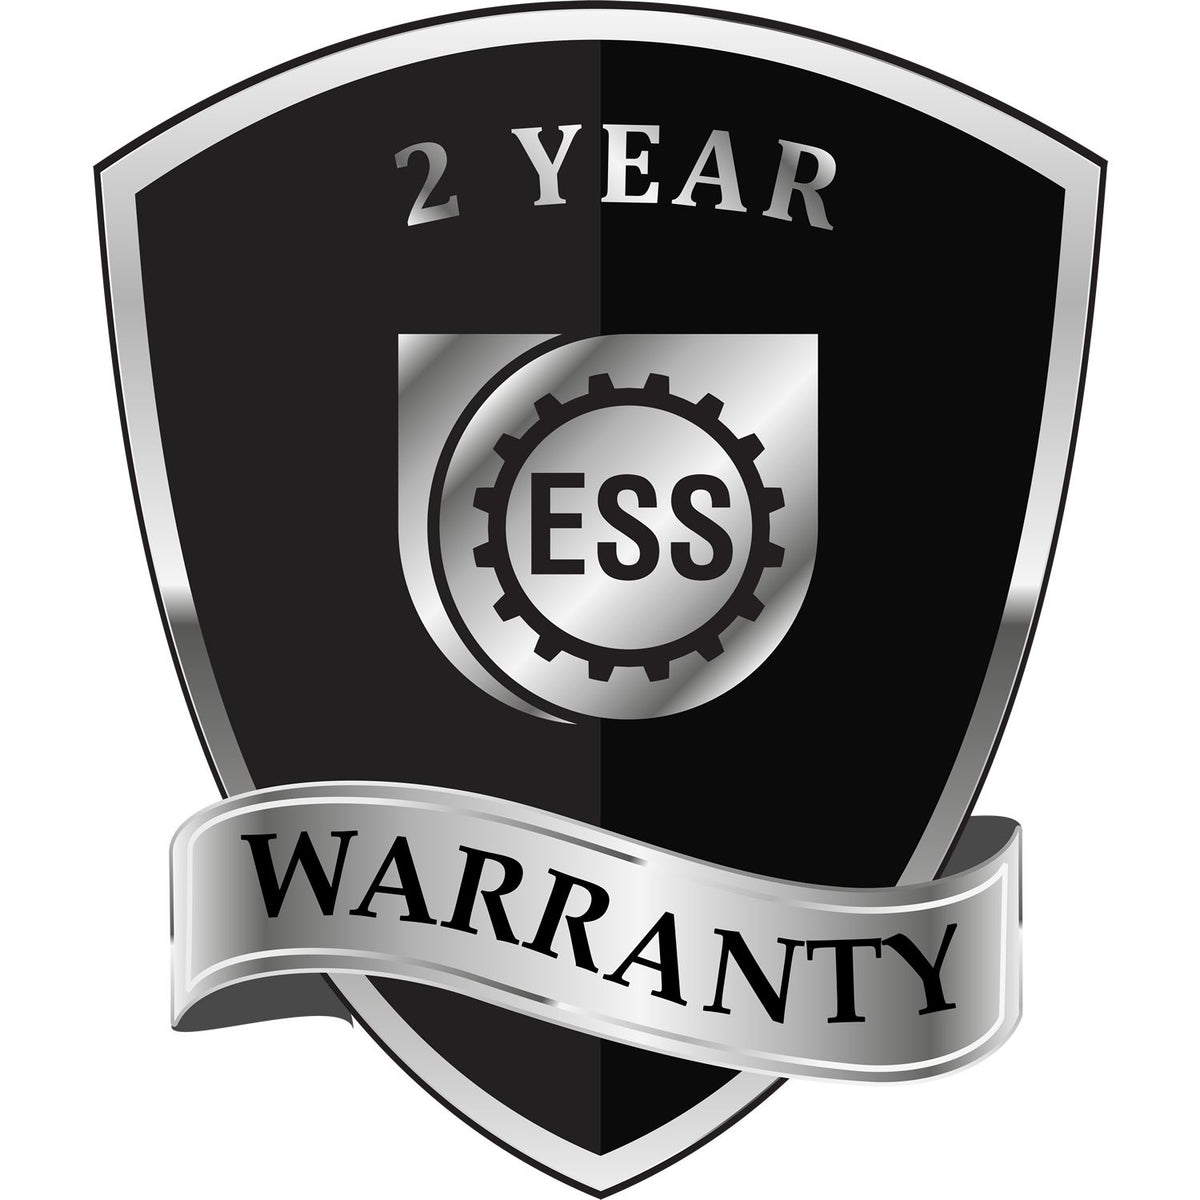 A badge or emblem showing a warranty icon for the State of Tennessee Long Reach Architectural Embossing Seal